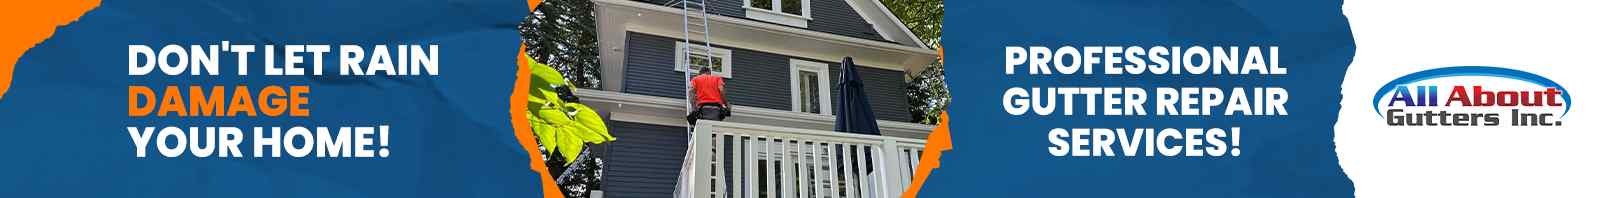 Professional Worker of All About Gutters Saving Your Home From Rain Water Damage.